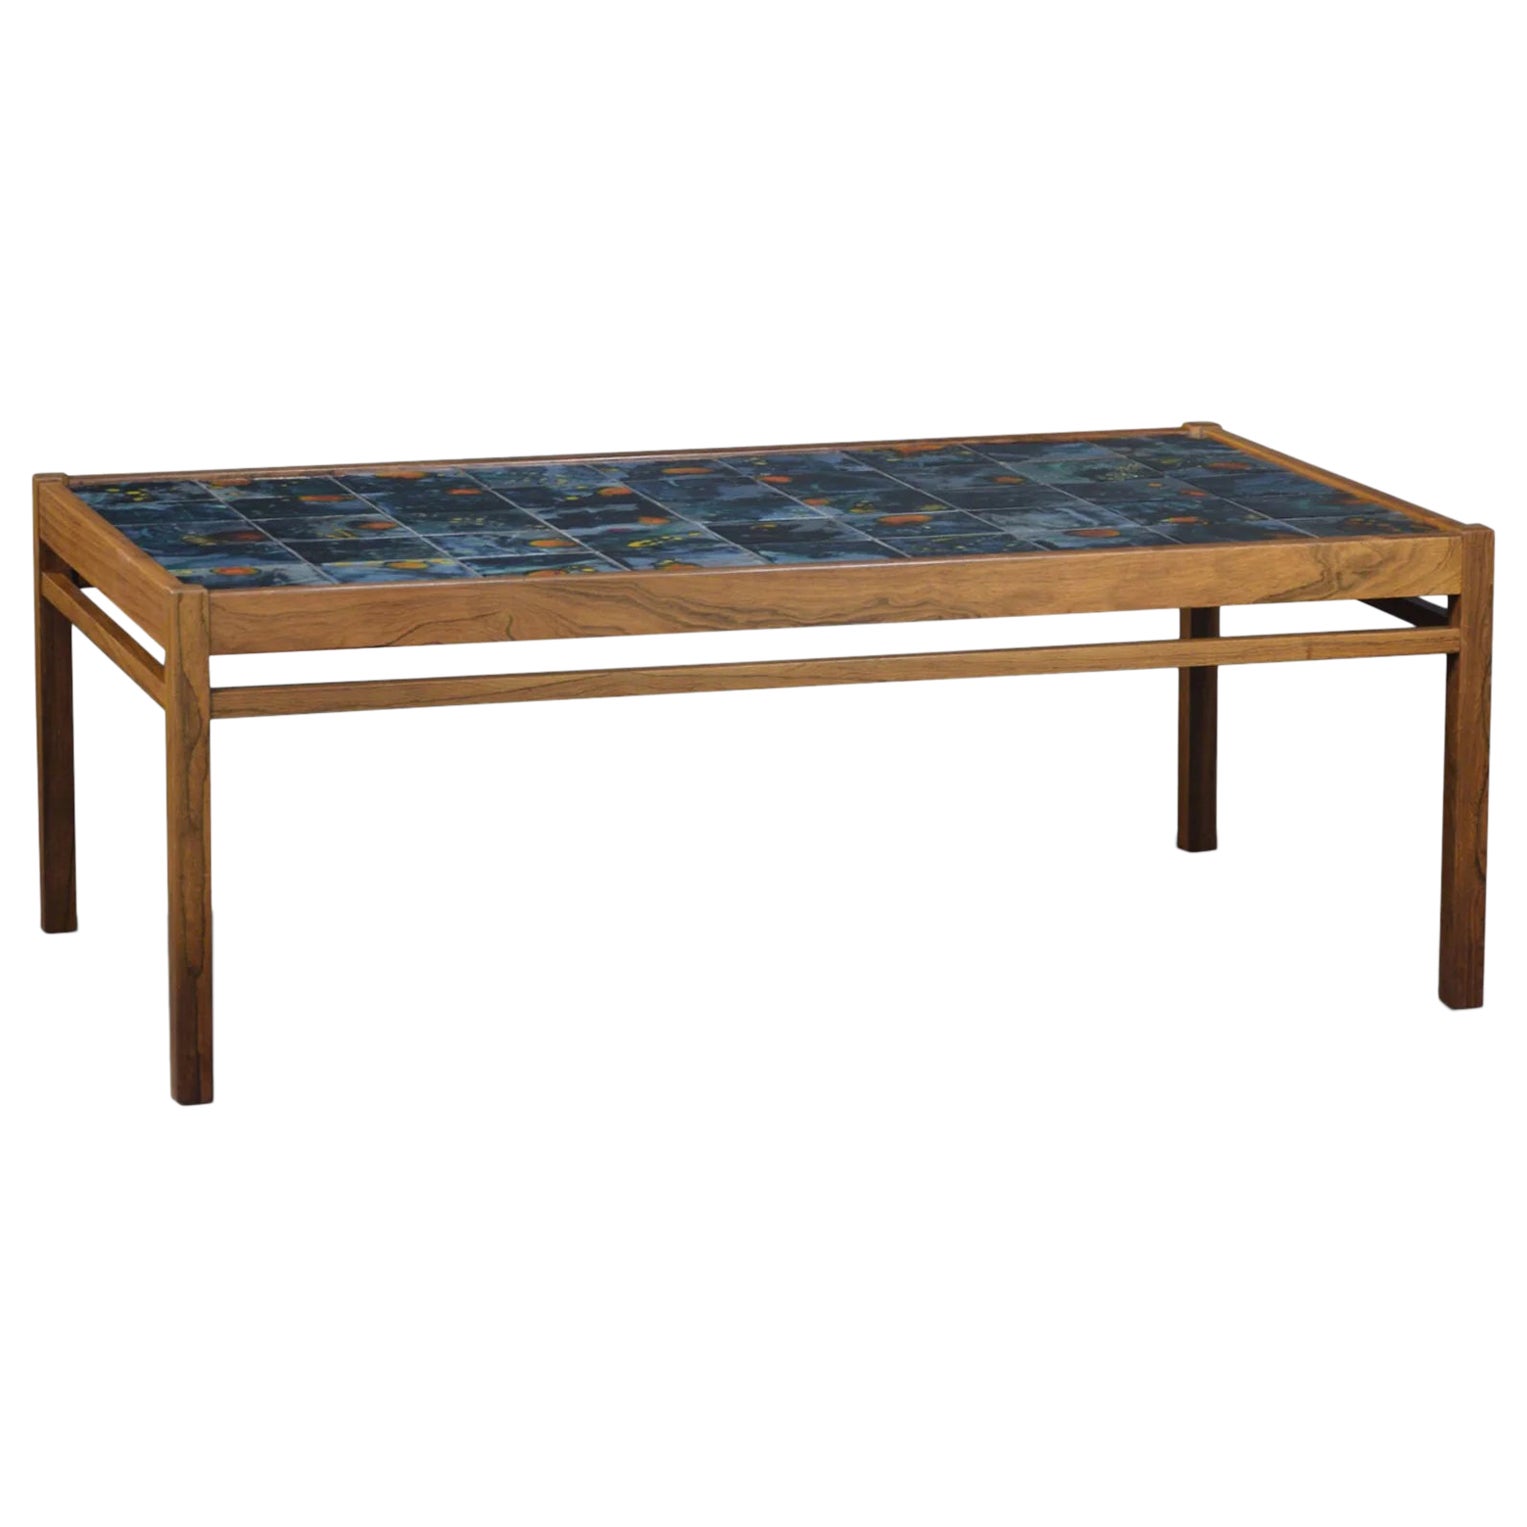 1960s rosewood + ceramic tile coffee table For Sale